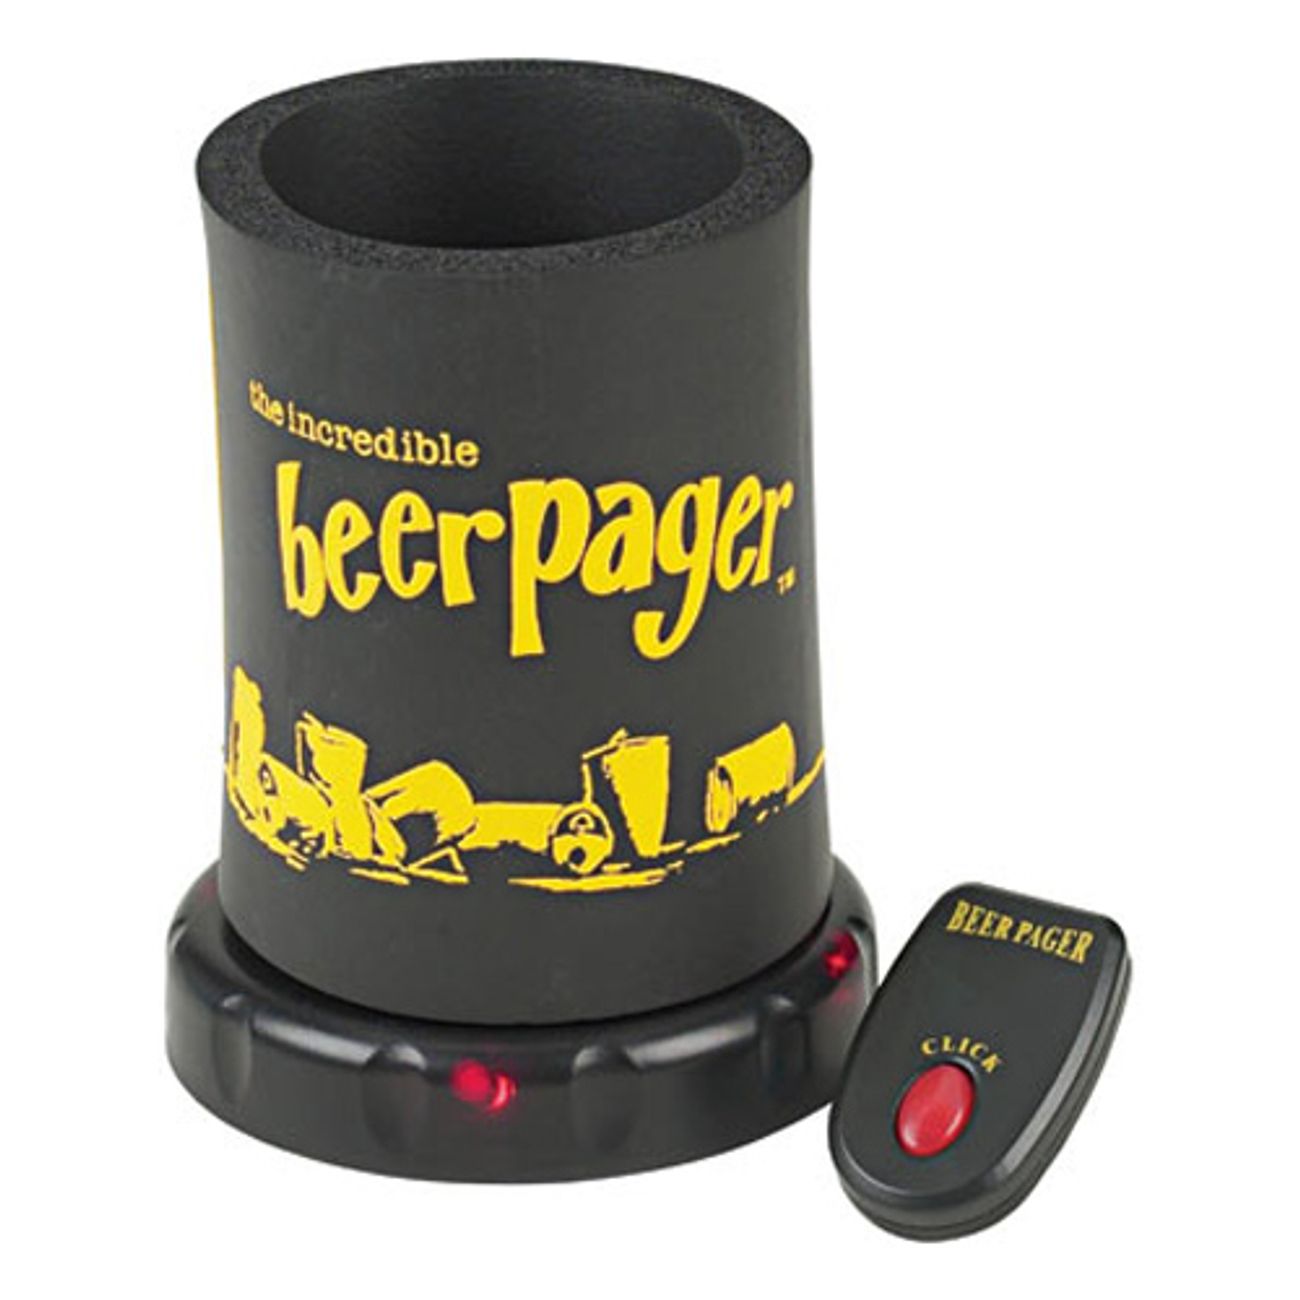 beerpager-1